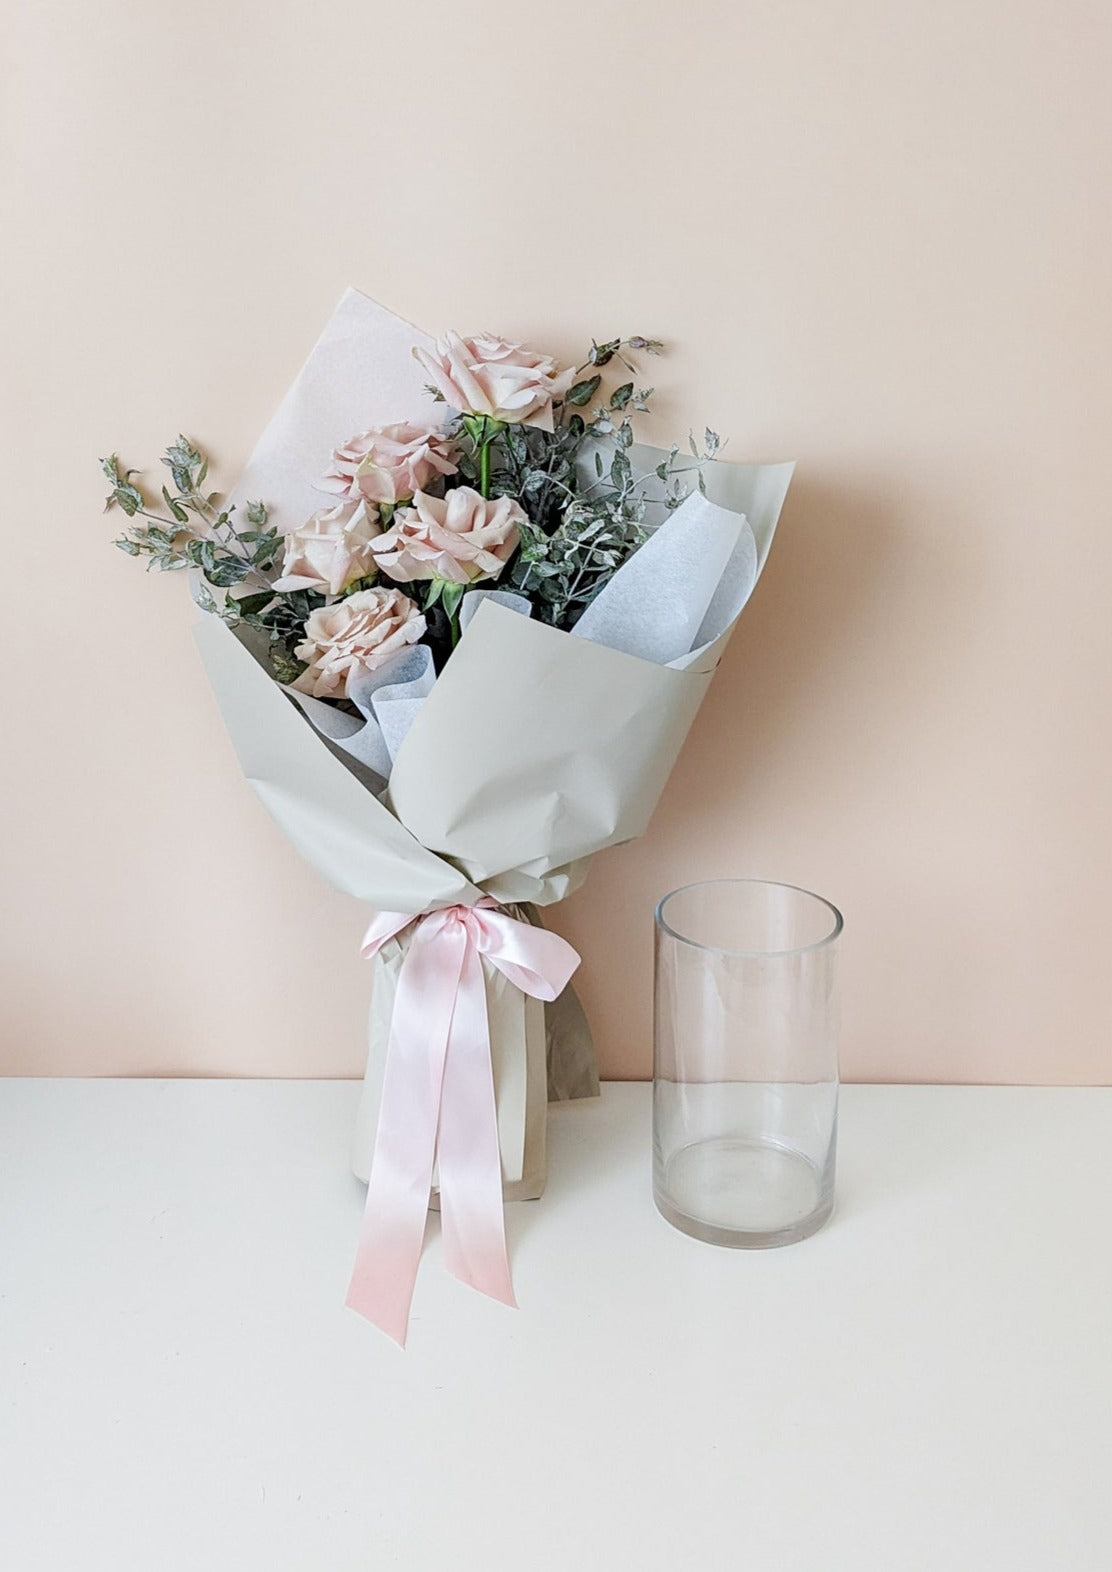 5 Blush Pink Roses Bouquet